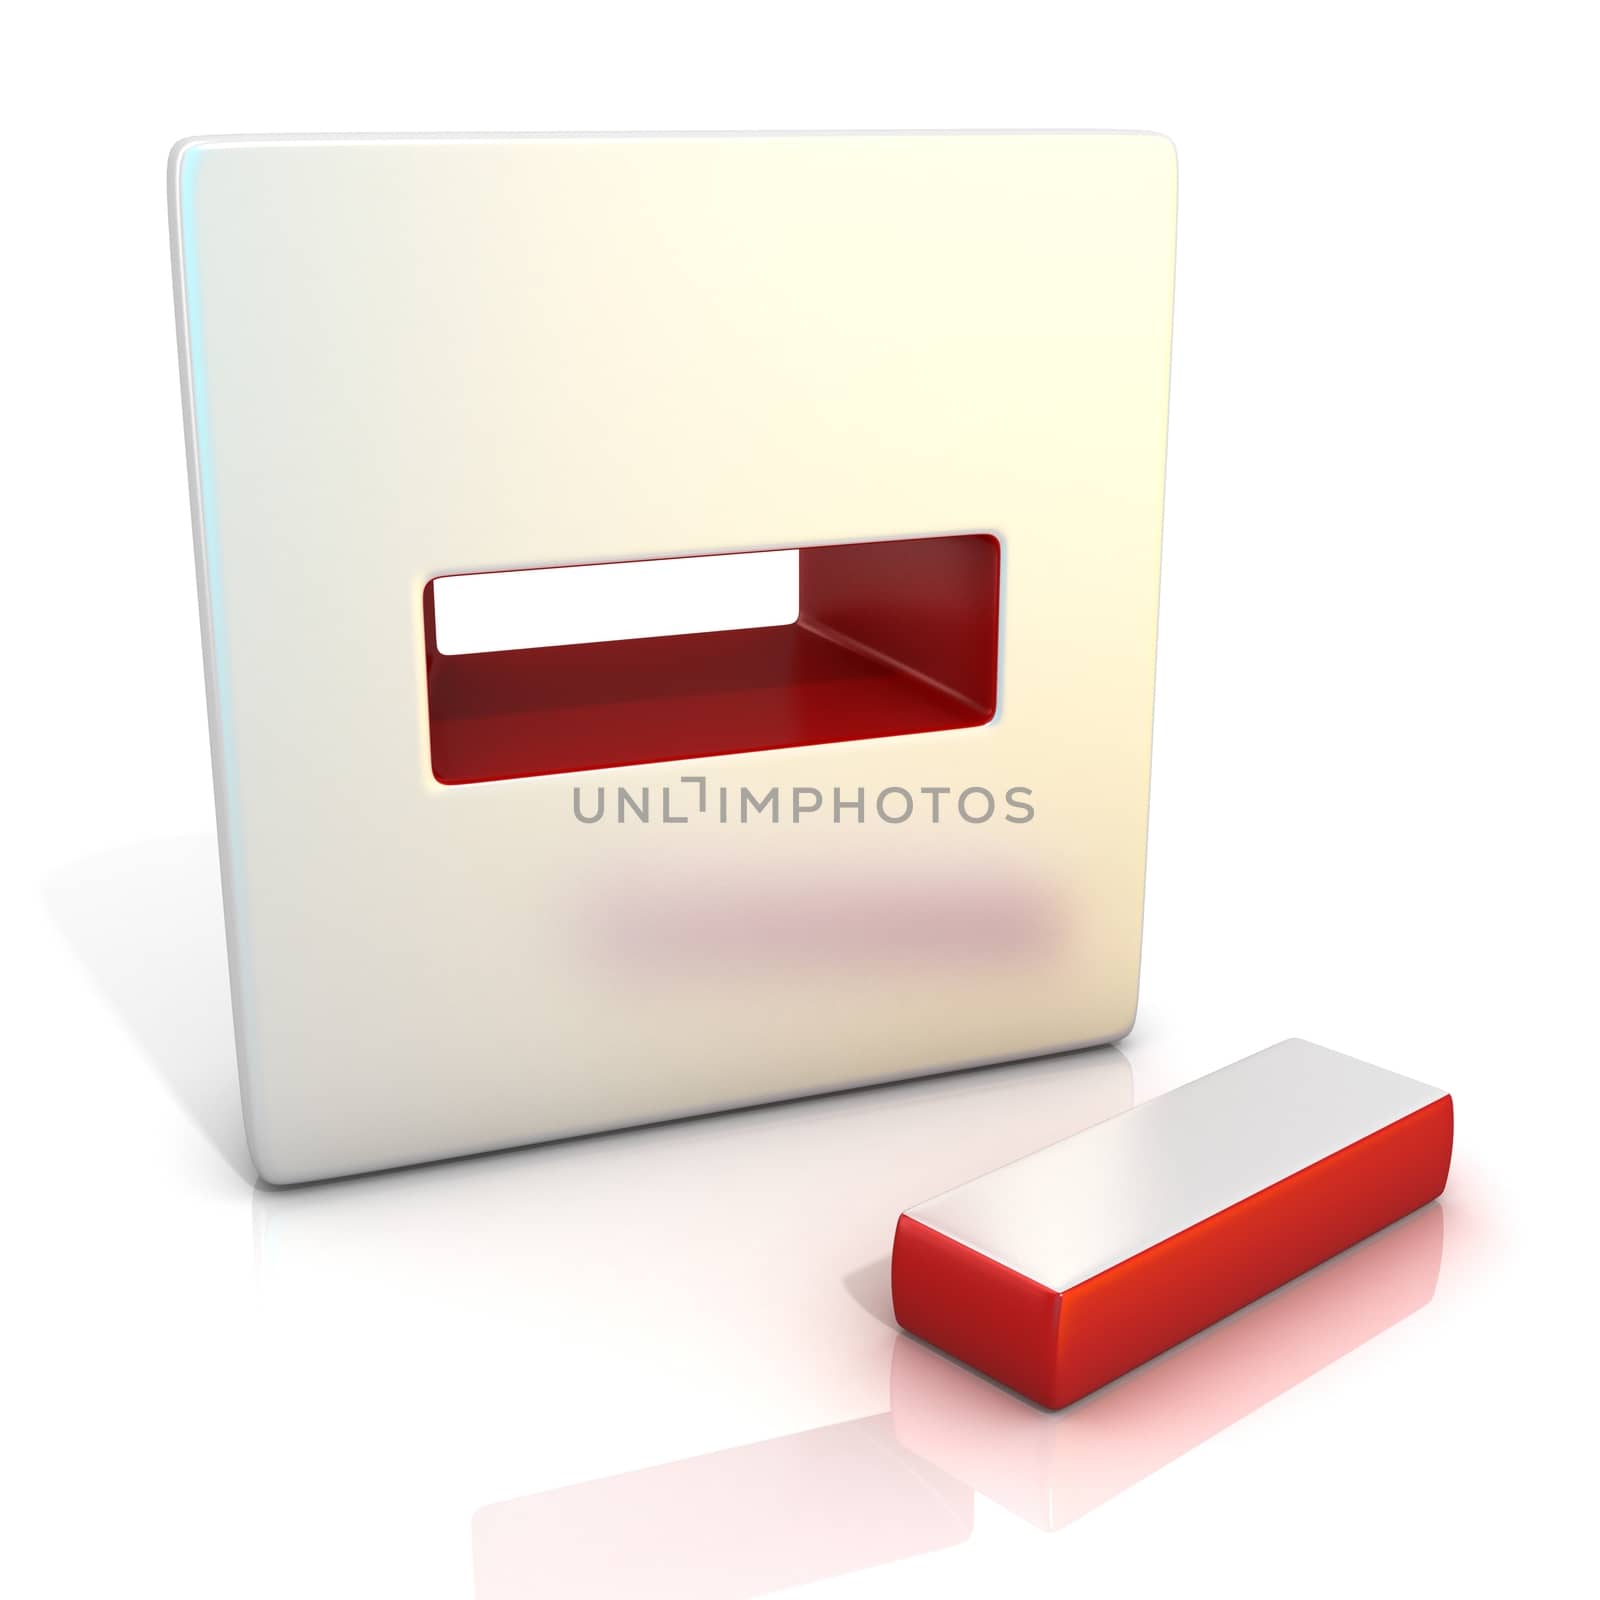 Minus sign. 3D render illustration, isolated on white. Side view